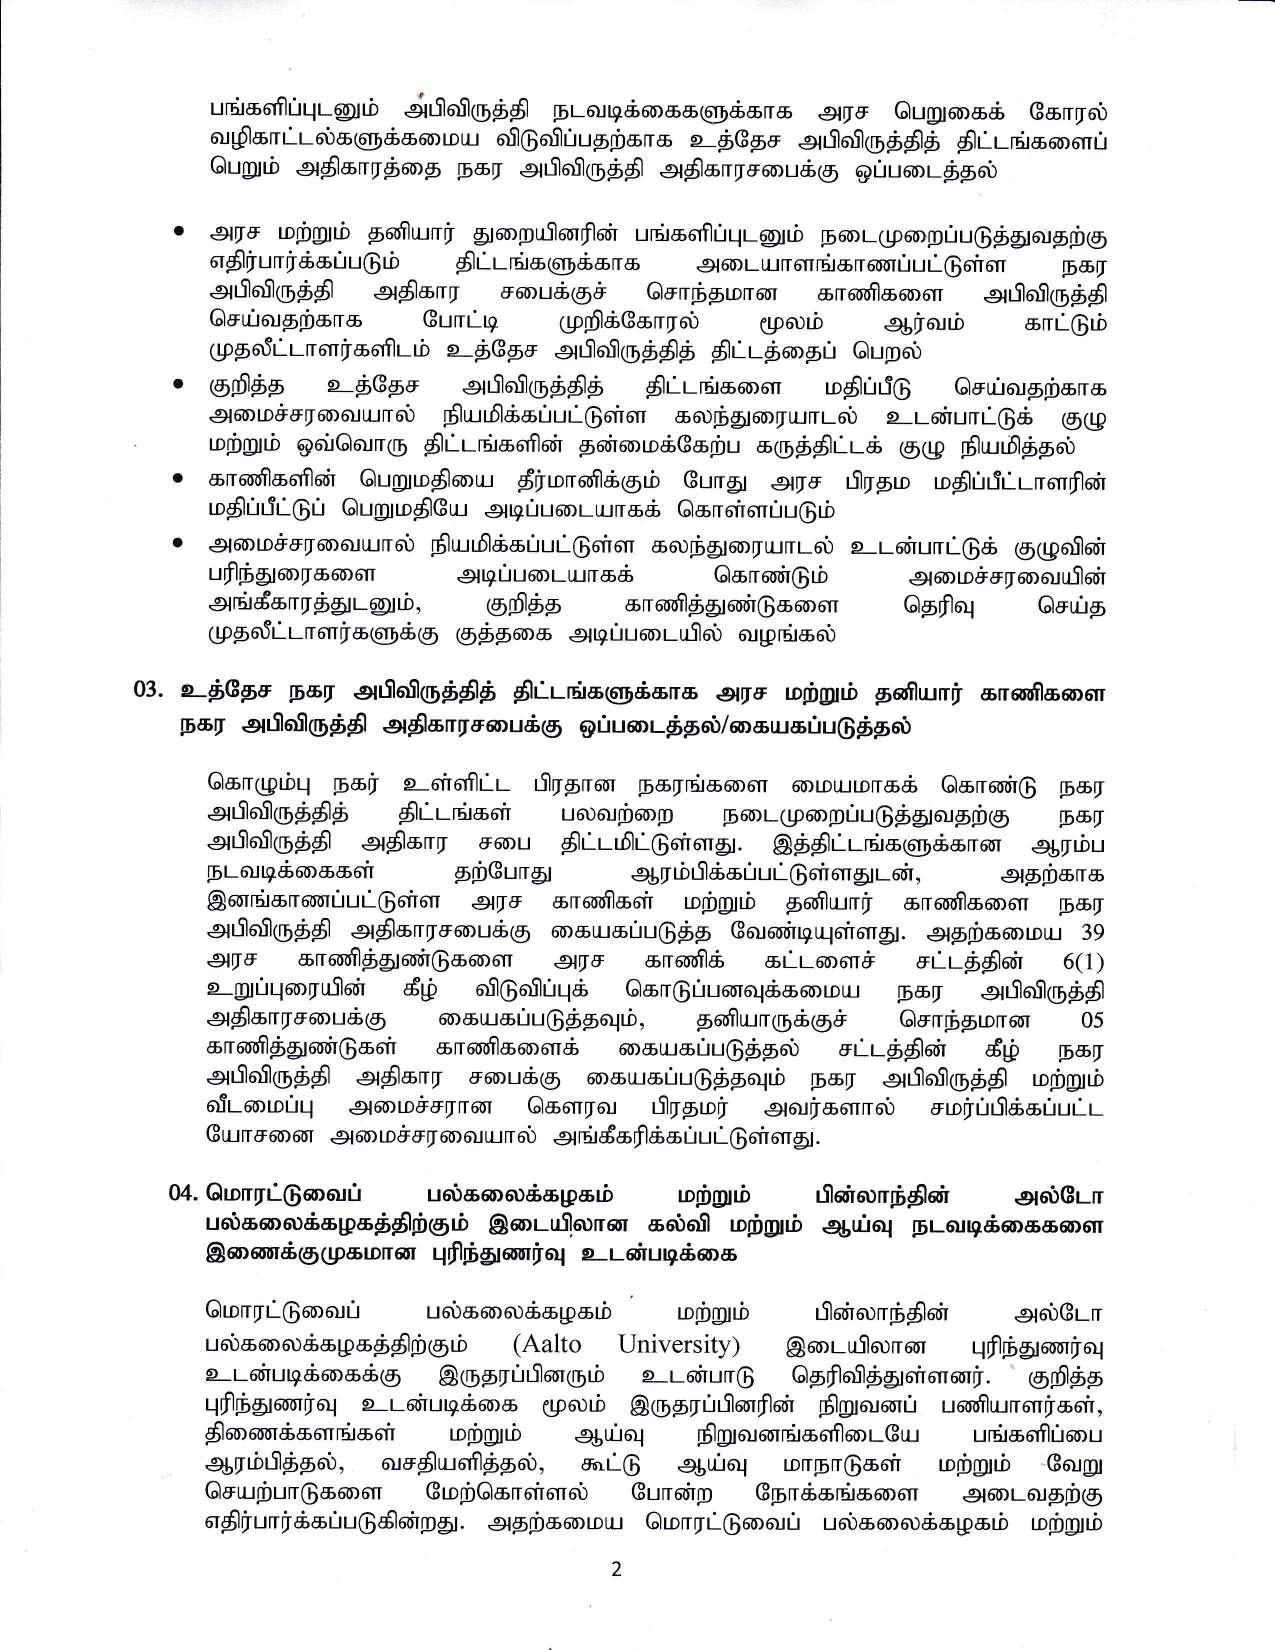 Cabinet Decision on 19.10.2020 Tamil compressed page 002